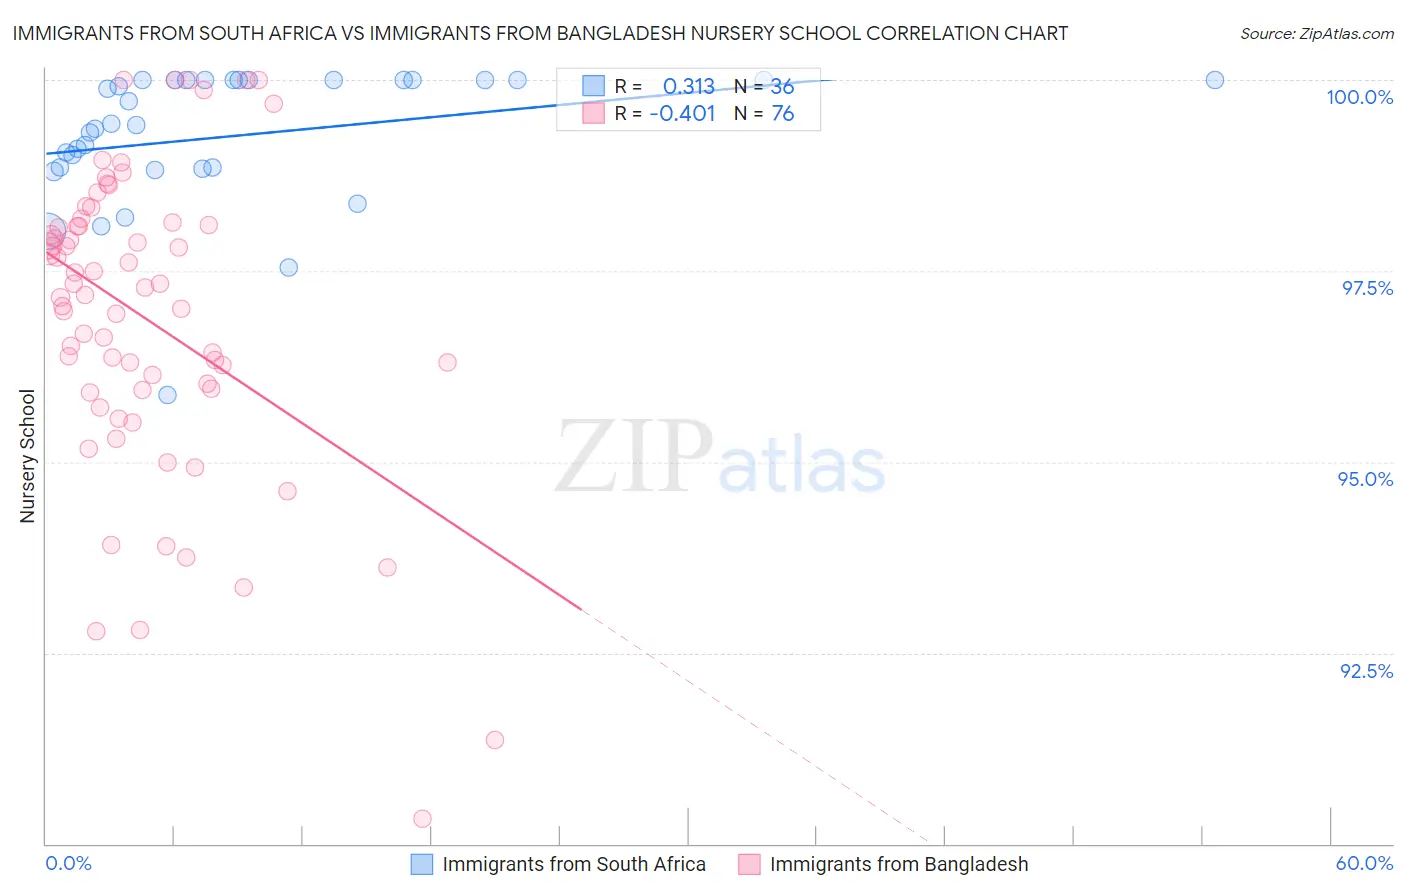 Immigrants from South Africa vs Immigrants from Bangladesh Nursery School